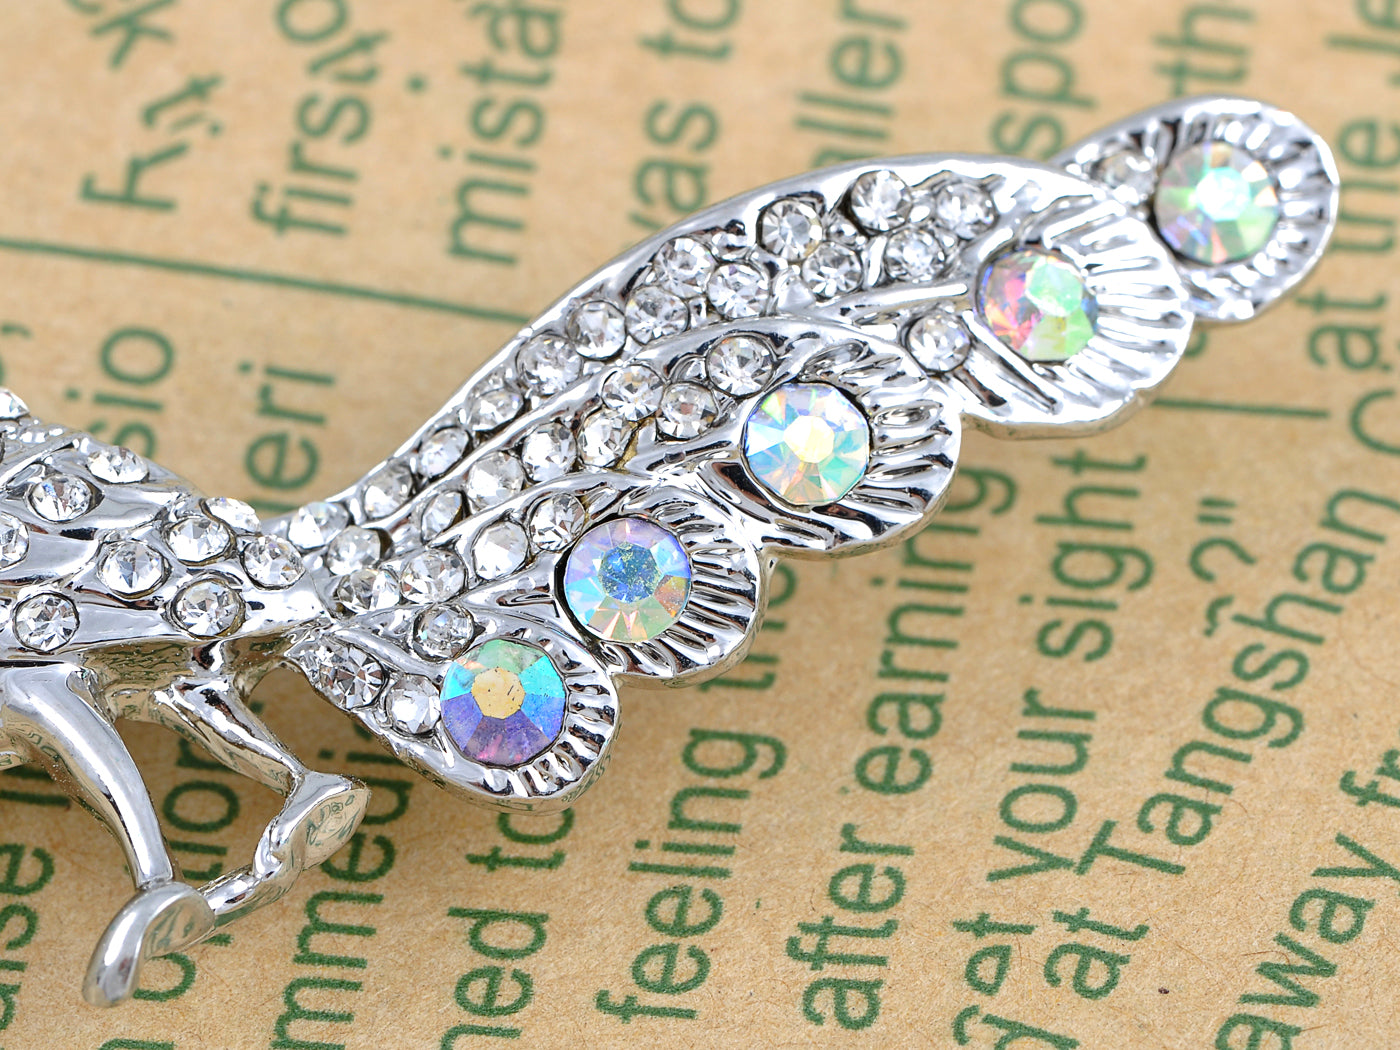 Silver Peacock Bird Iridescent Tail Feather Brooch Pin